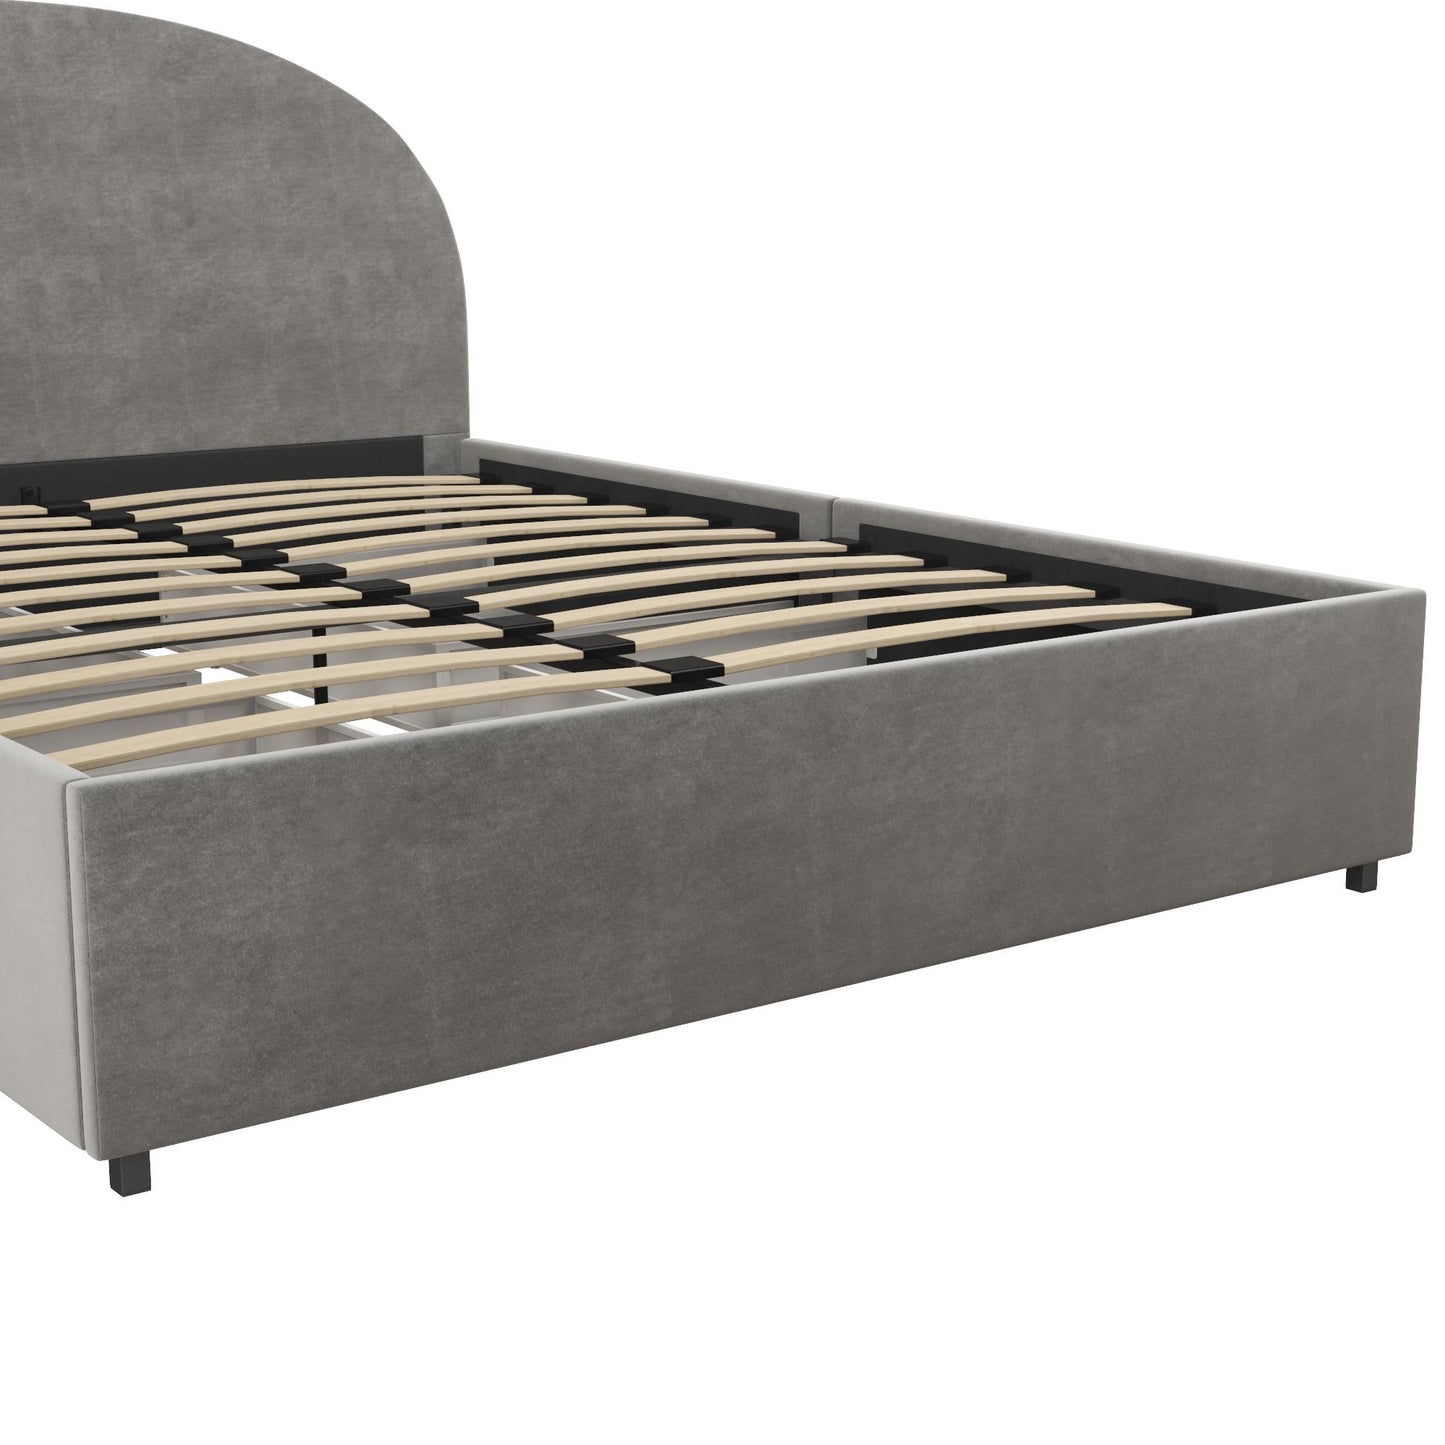 Moon Upholstered Bed with Storage - Light Gray - Full